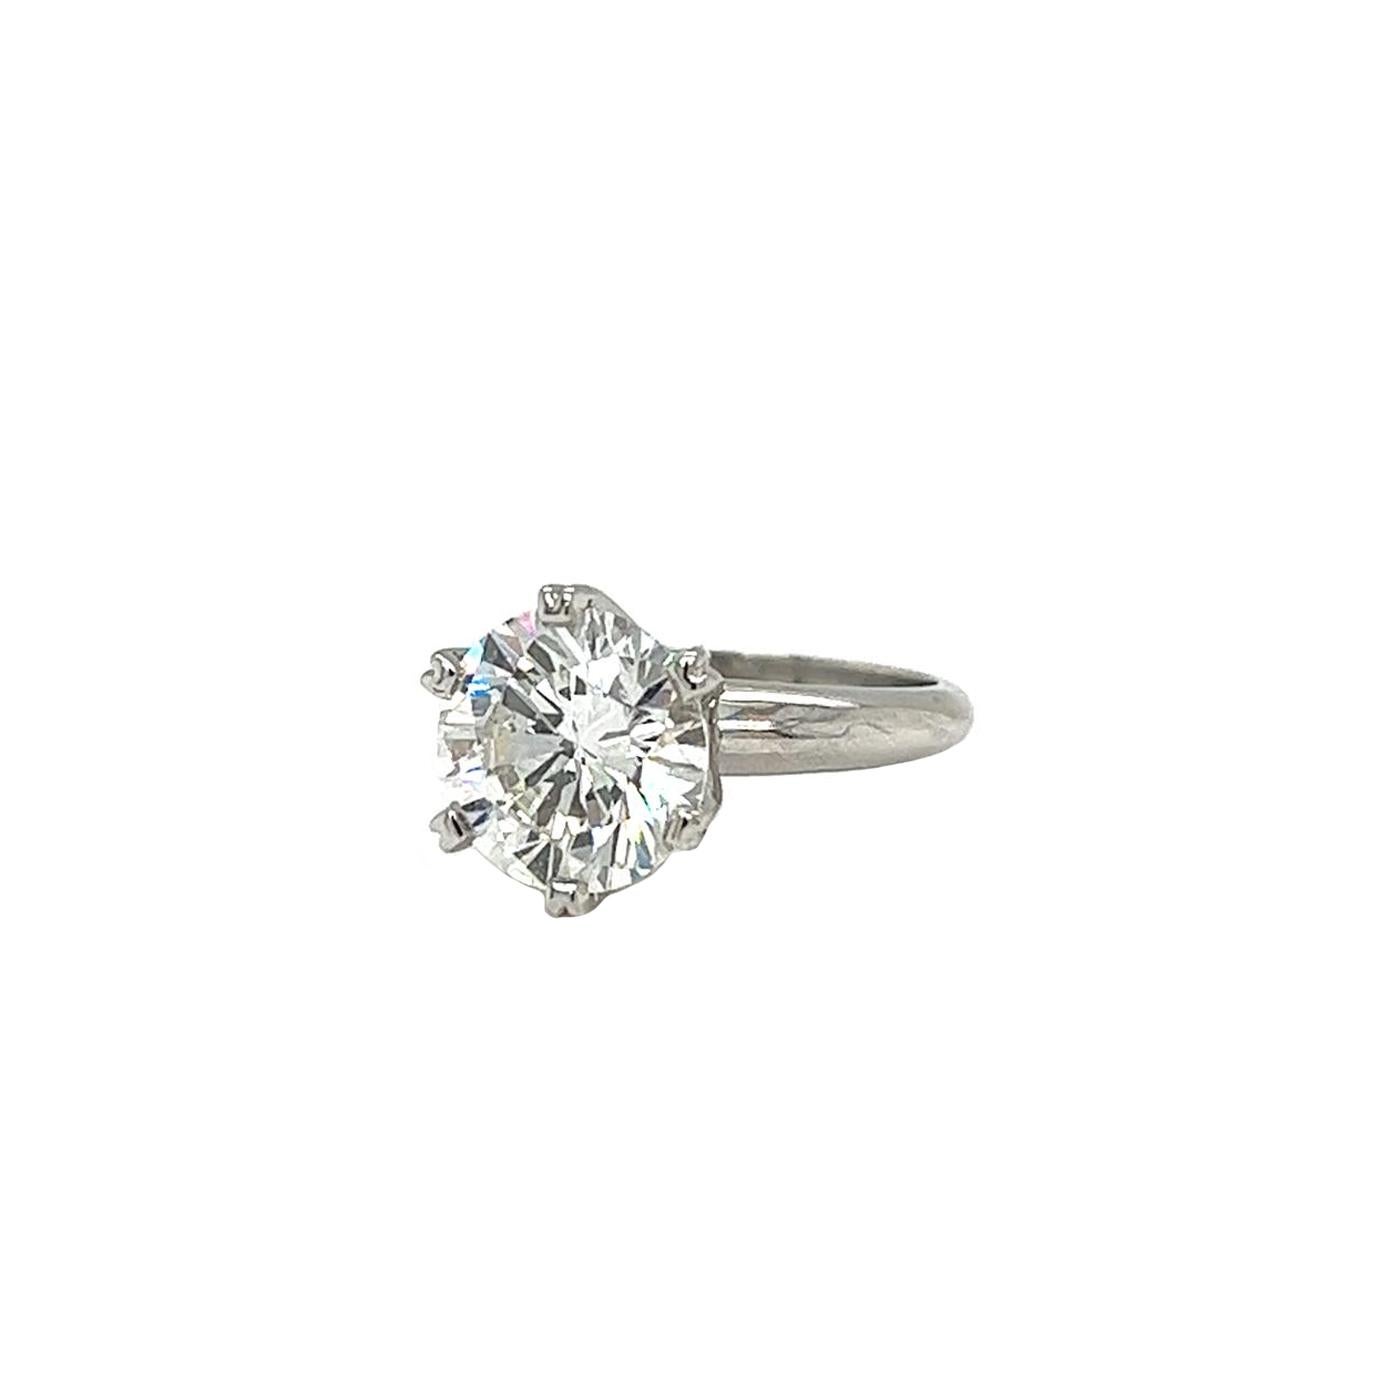 3.10ct Natural Round Diamond Solitaire Ring 6 Prong 14K White Gold Si2 Clarity In Good Condition For Sale In Aventura, FL